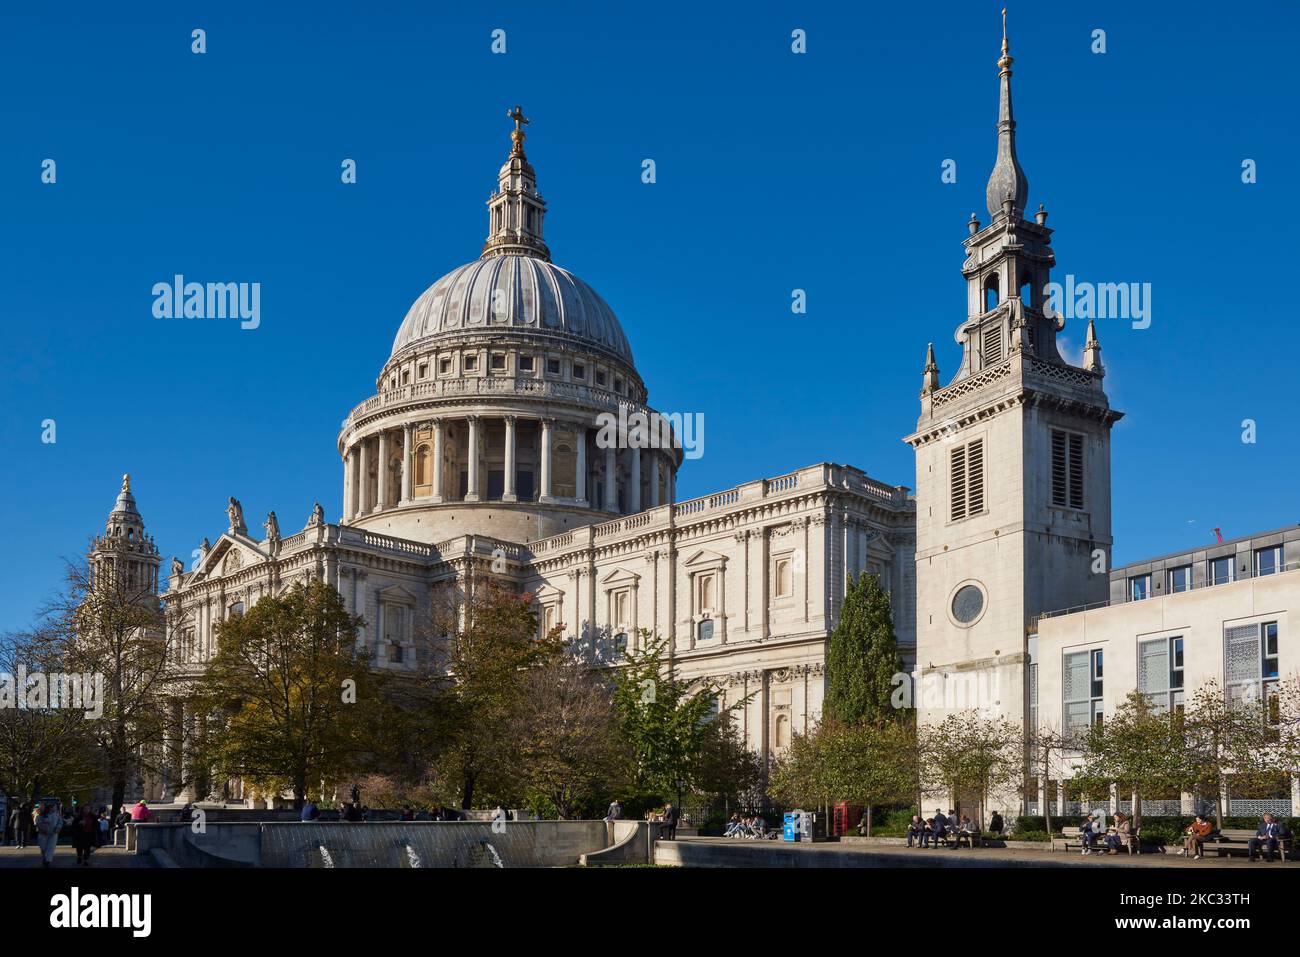 St Paul's Cathedral in the City of London, UK, with the tower of St Augustine Watling Street in the foreground Stock Photo